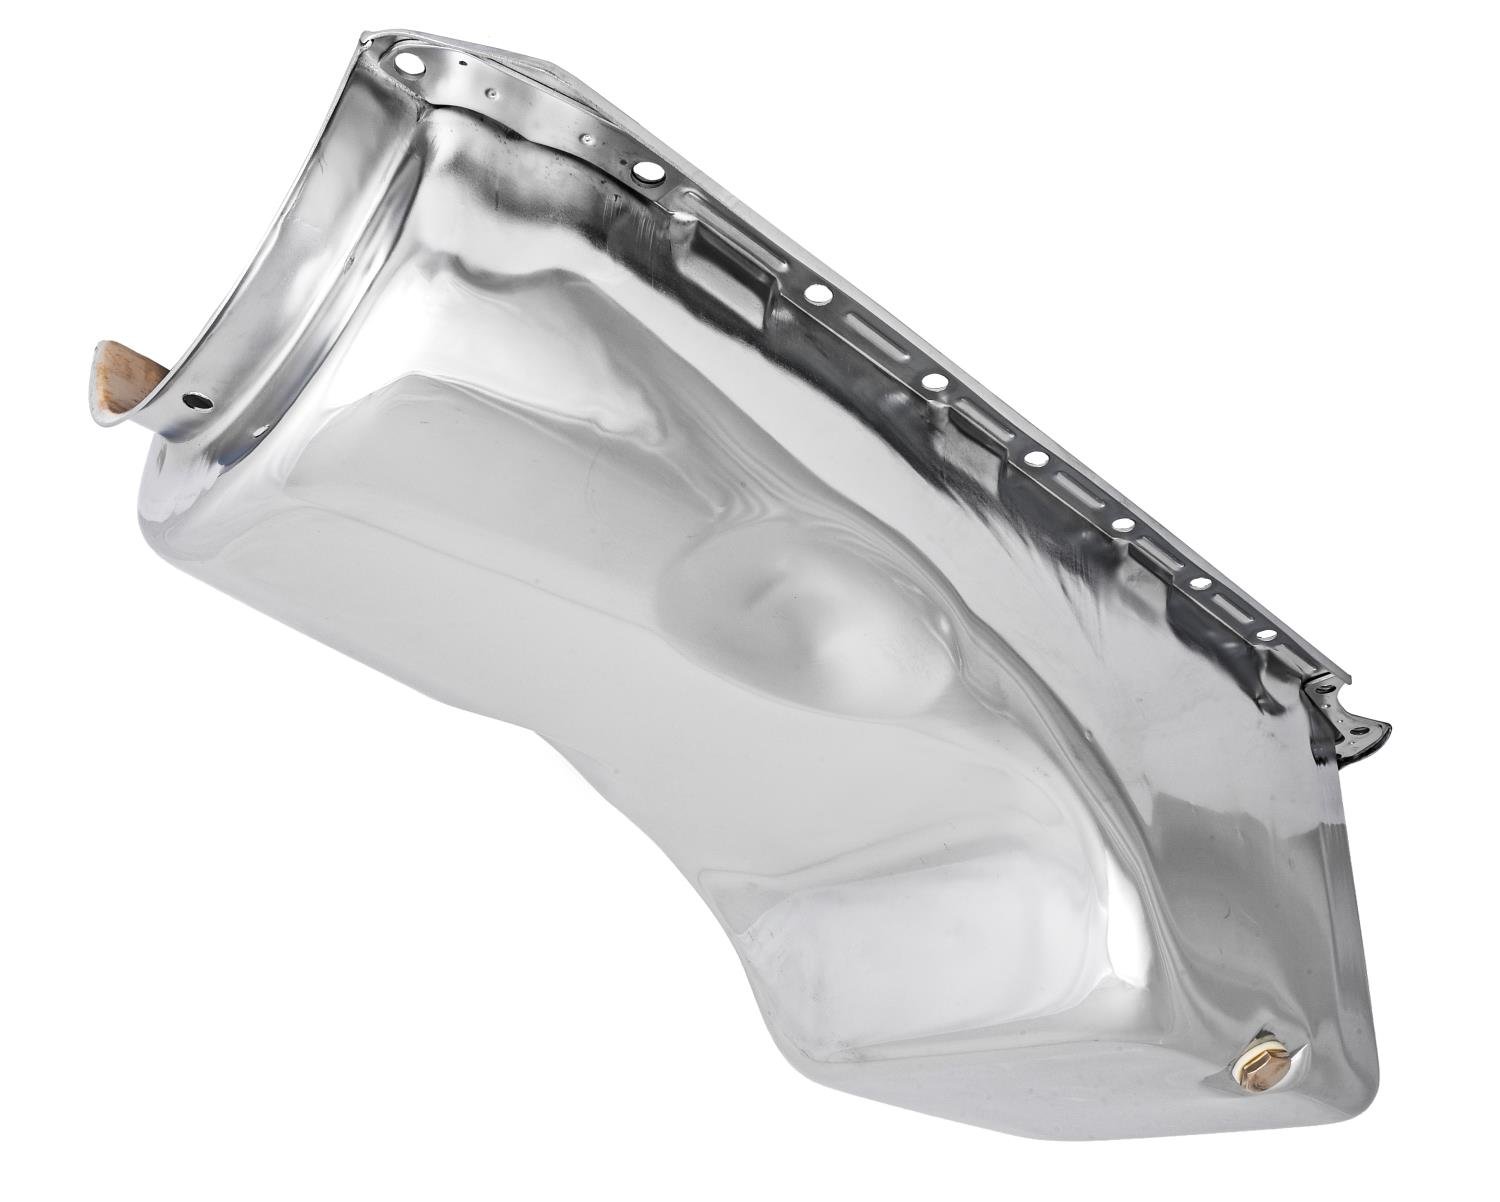 Stock-Style Replacement Oil Pan for 1965-1990 Big Block Chevy Mark IV [Chrome Finish]